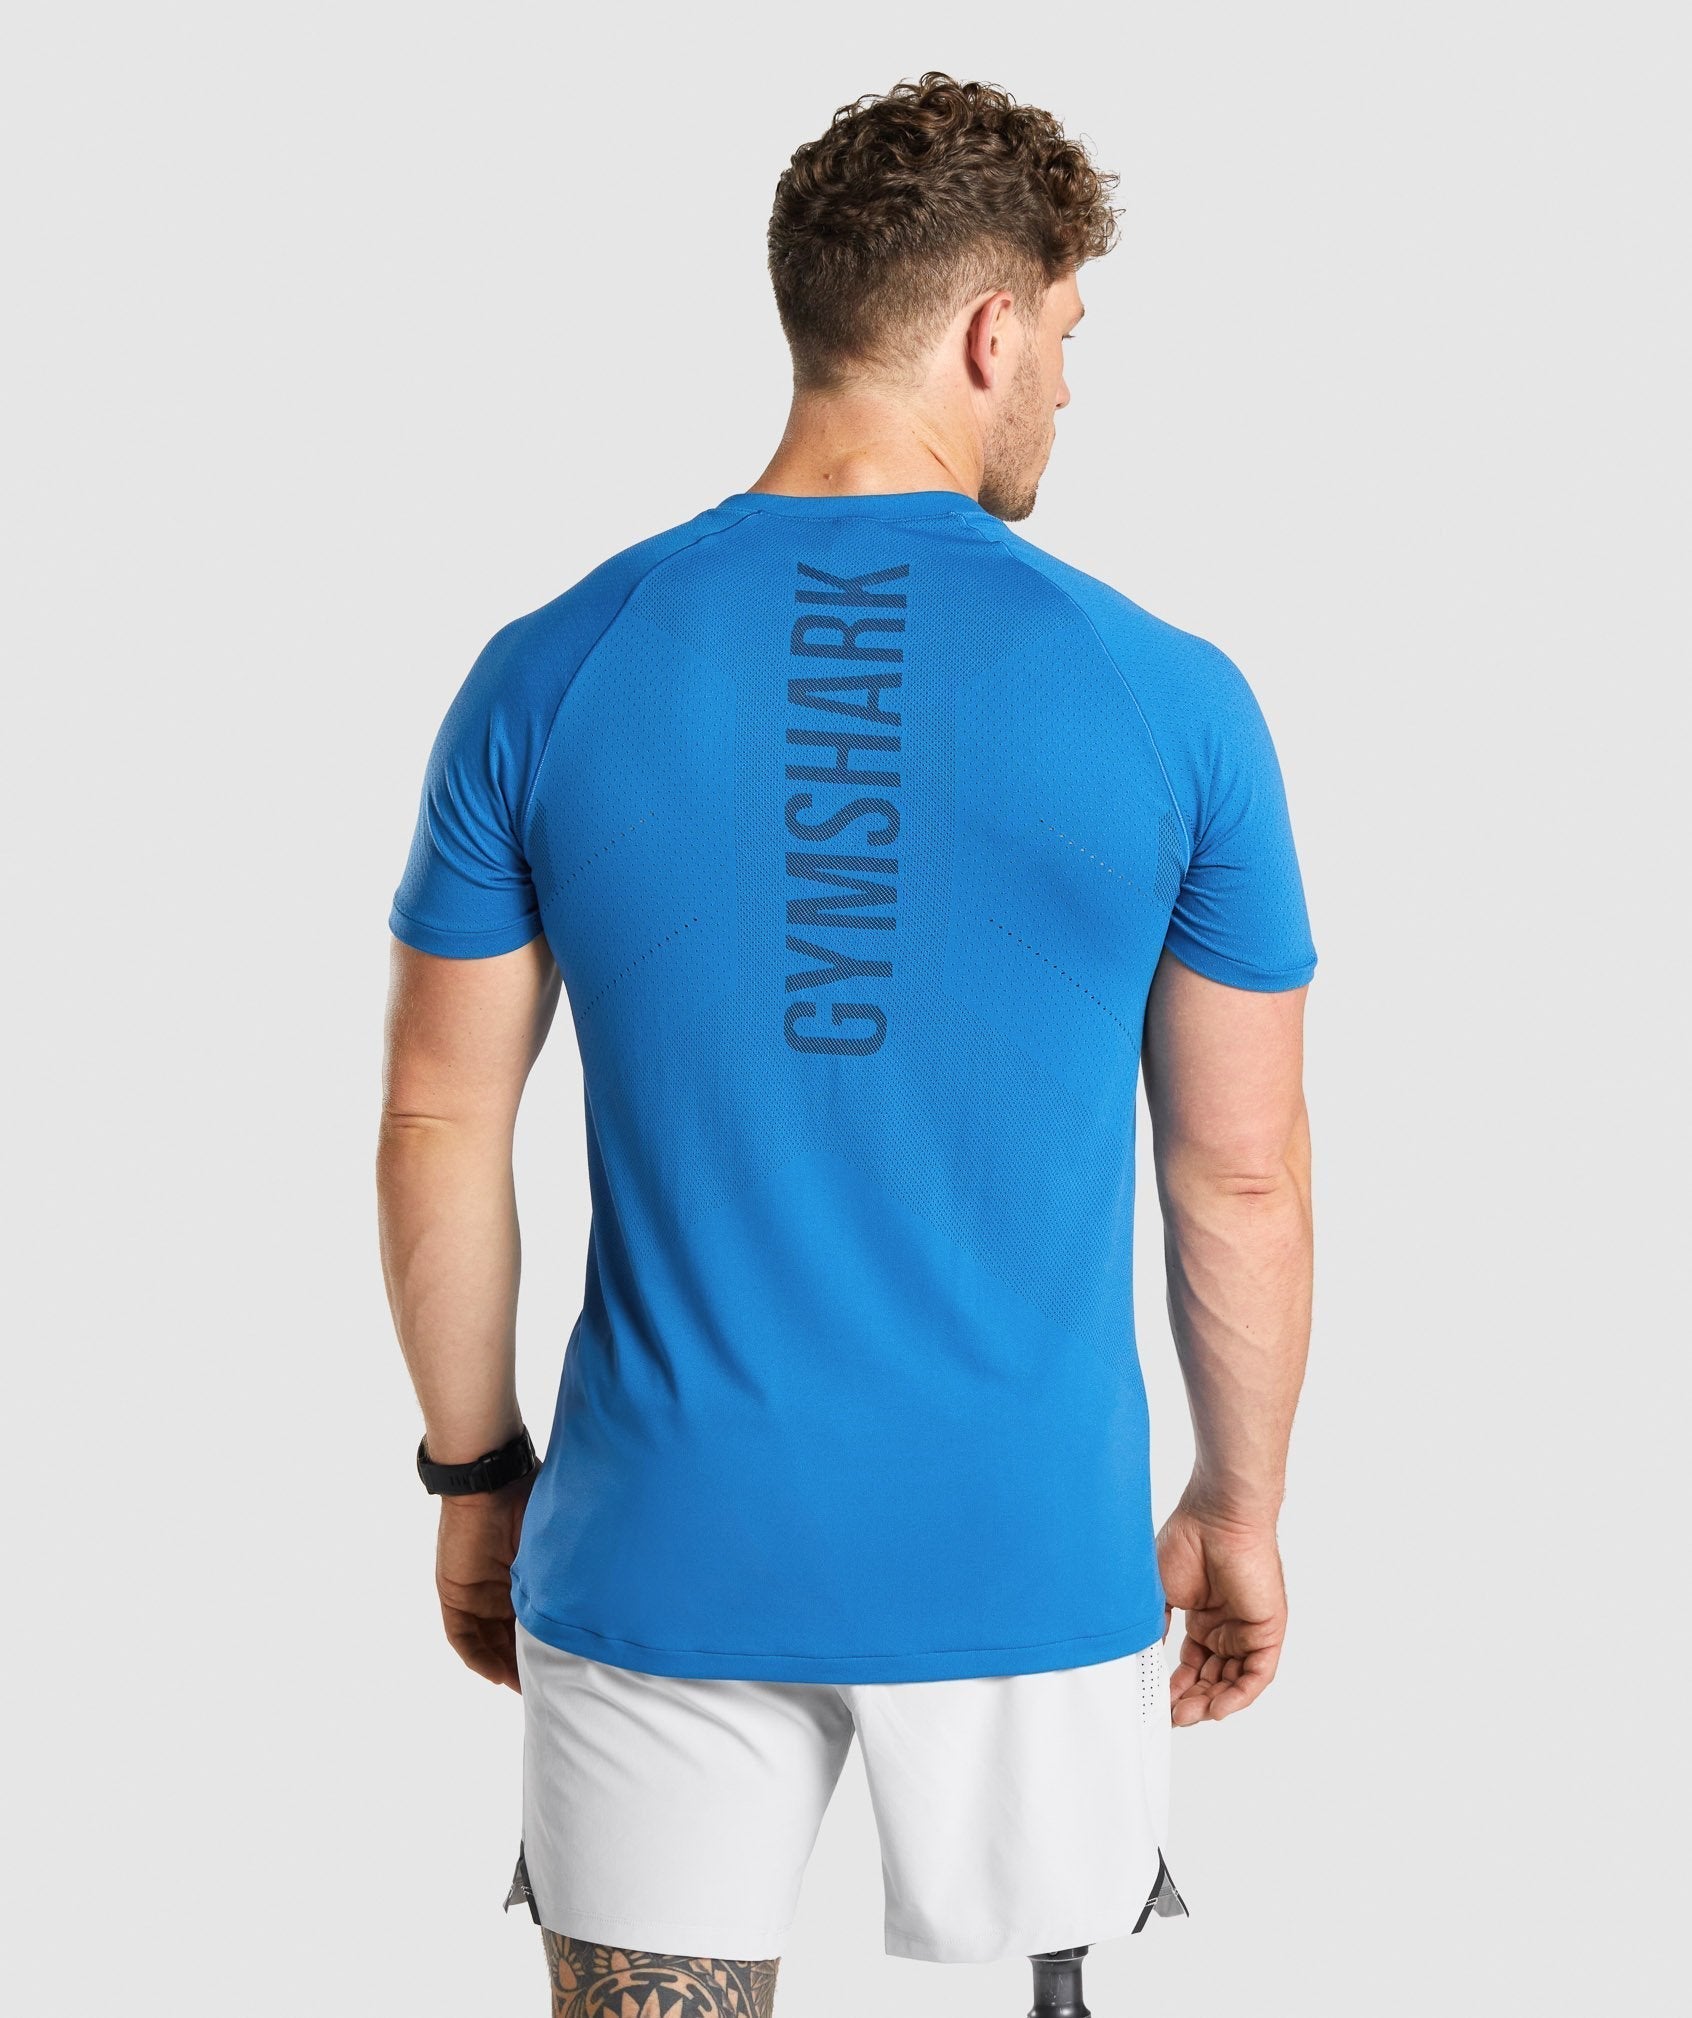 Apex Perform T-shirt in Blue - view 2